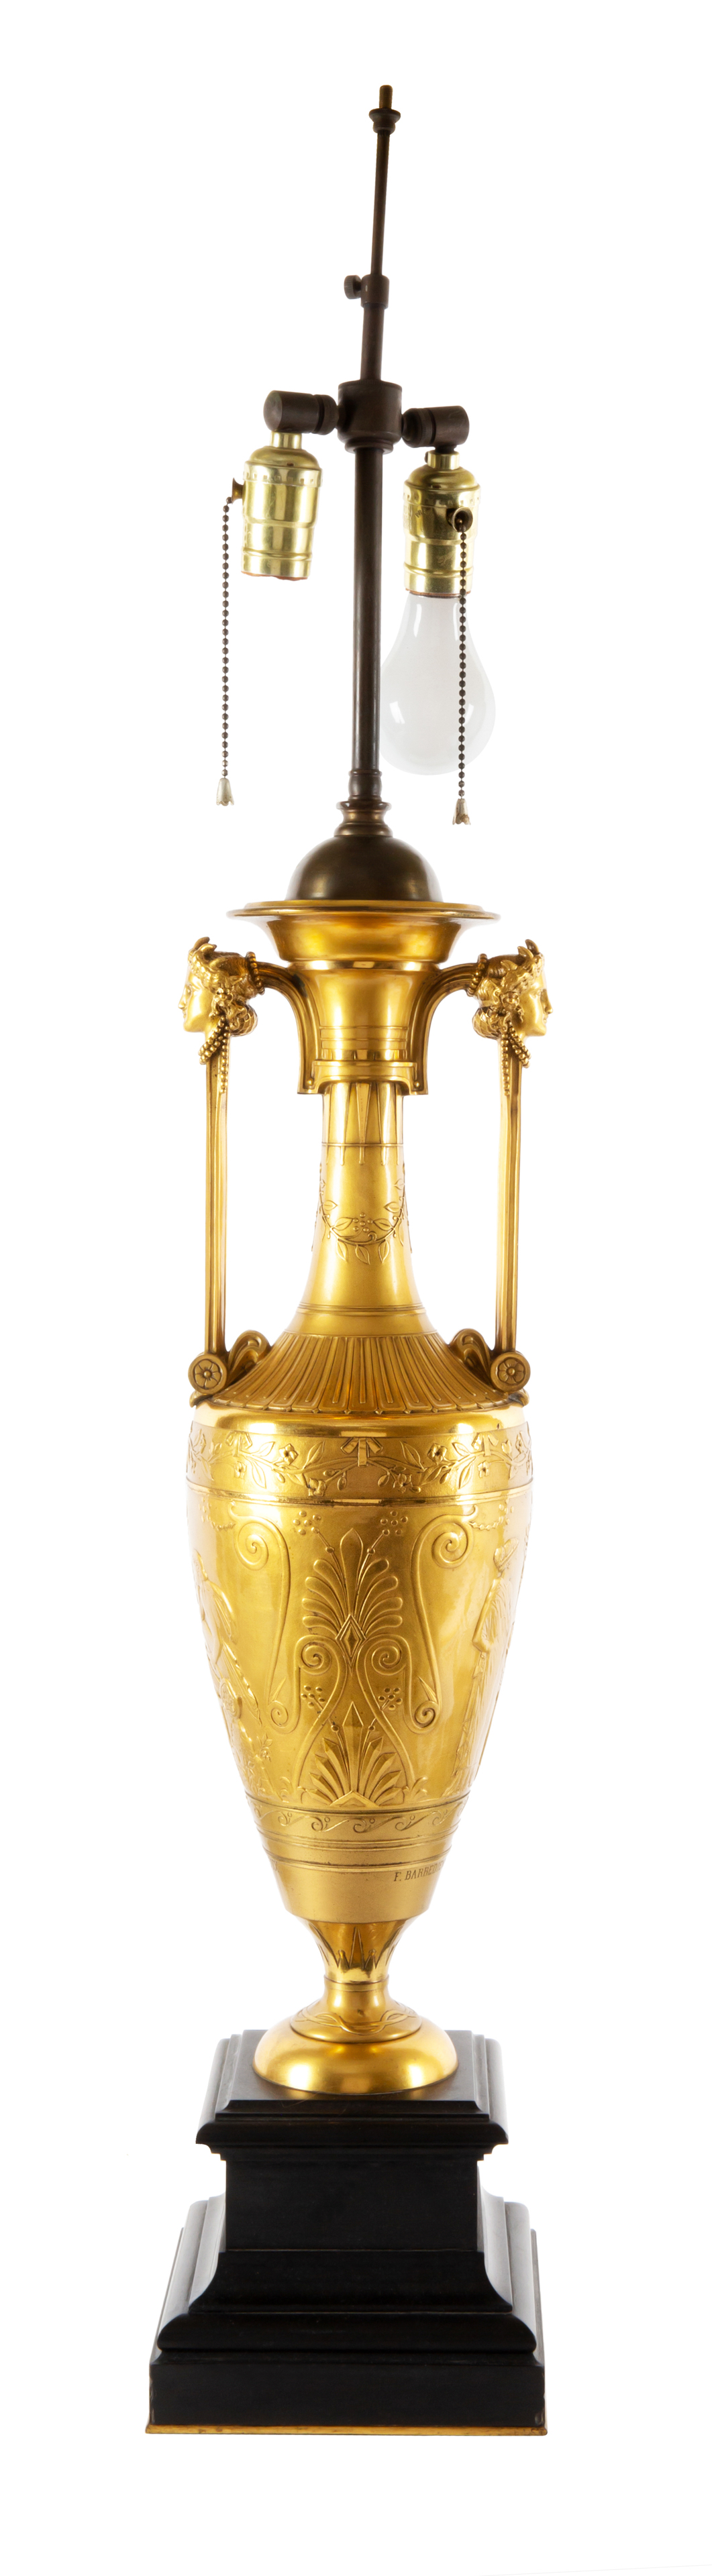 EGYPTIAN-REVIVAL GILT-BRONZE LAMP WITH BLACK SILK SHADE, 19TH CENTURY - Image 2 of 2